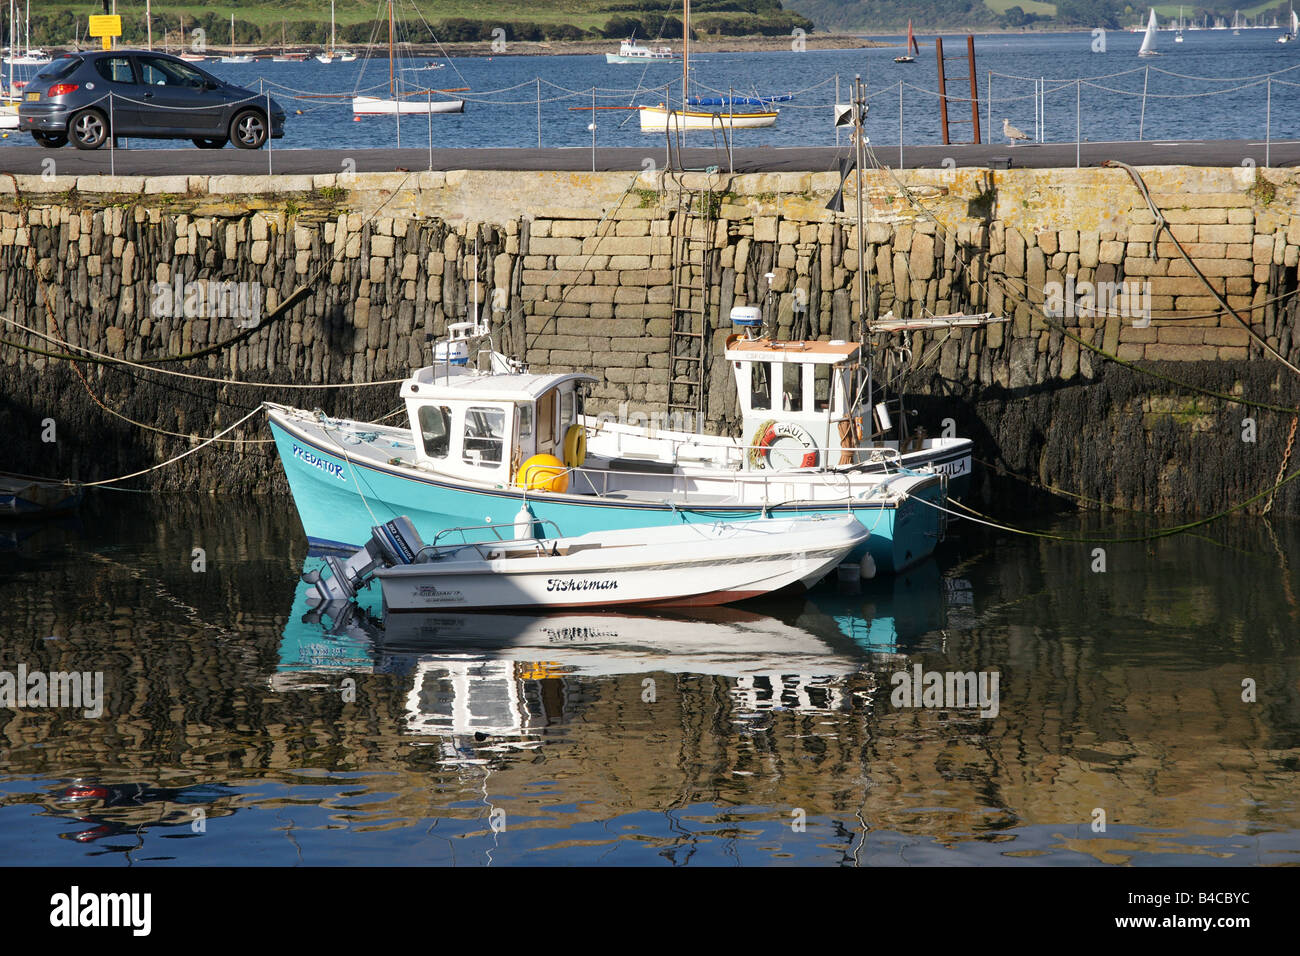 Boat in Falmouth Harbour Cornwall England Stock Photo